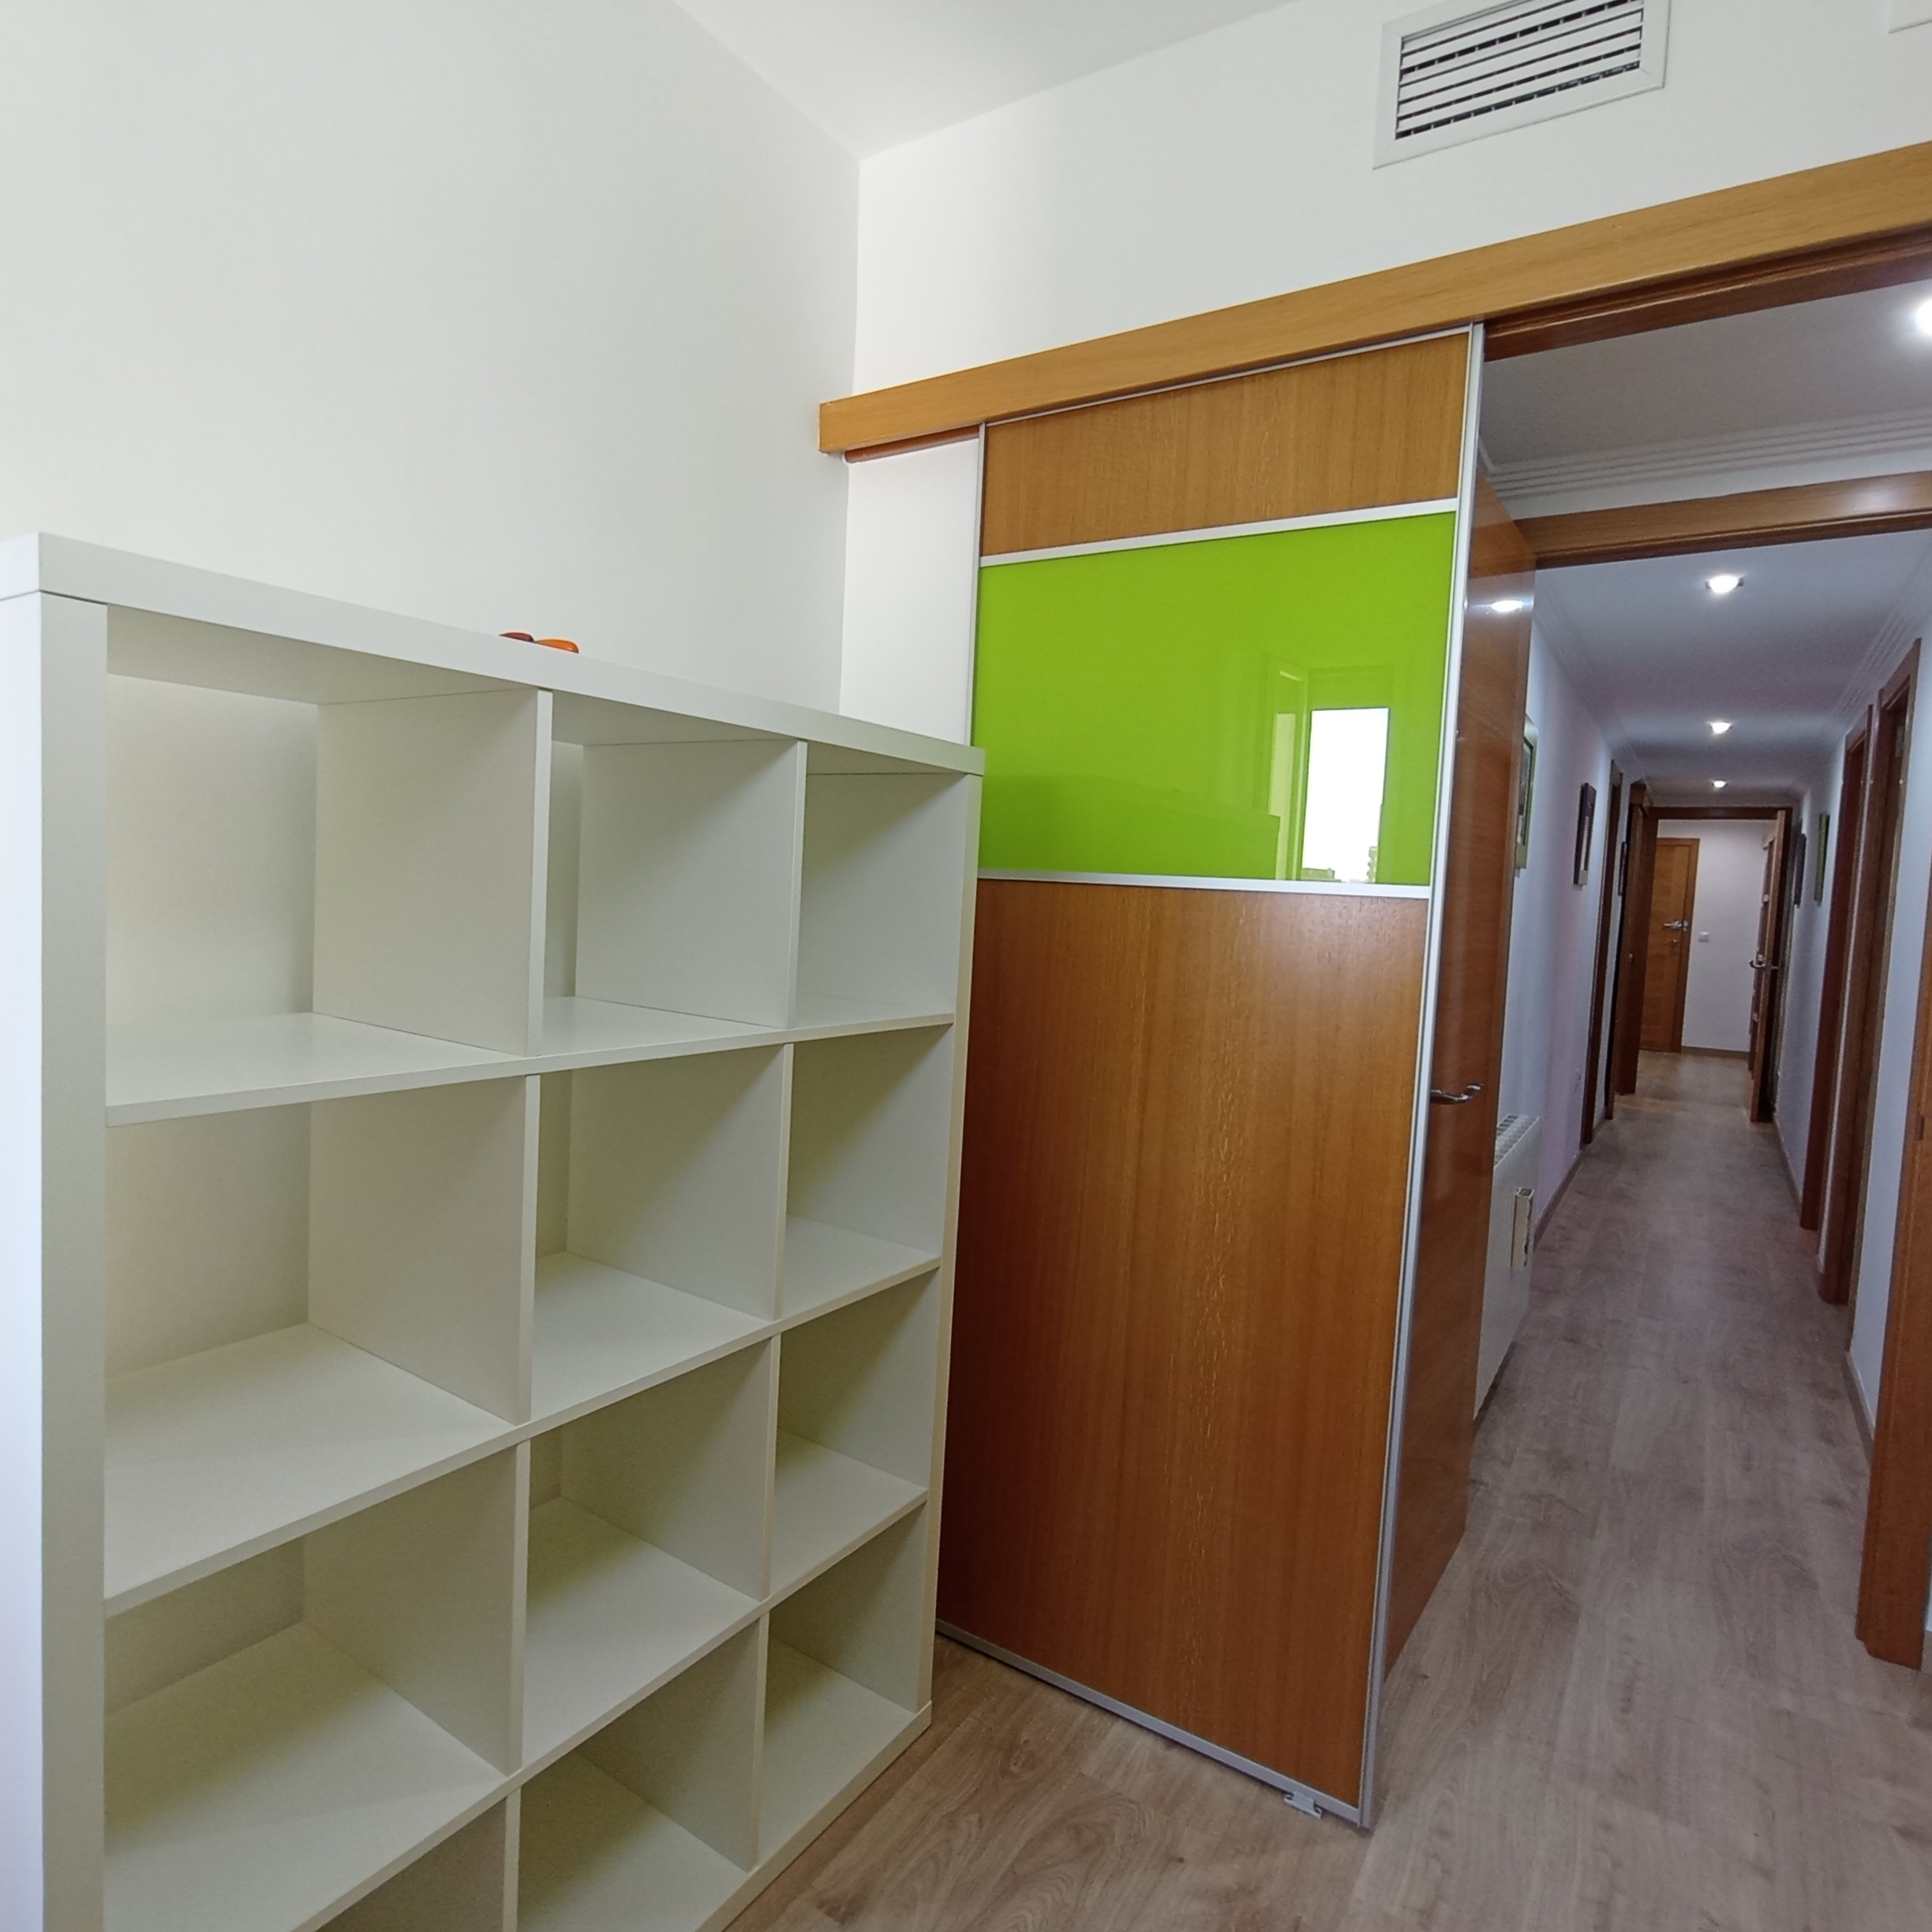 Escultor - 3 Bedroom apartment for rent in Valencia office